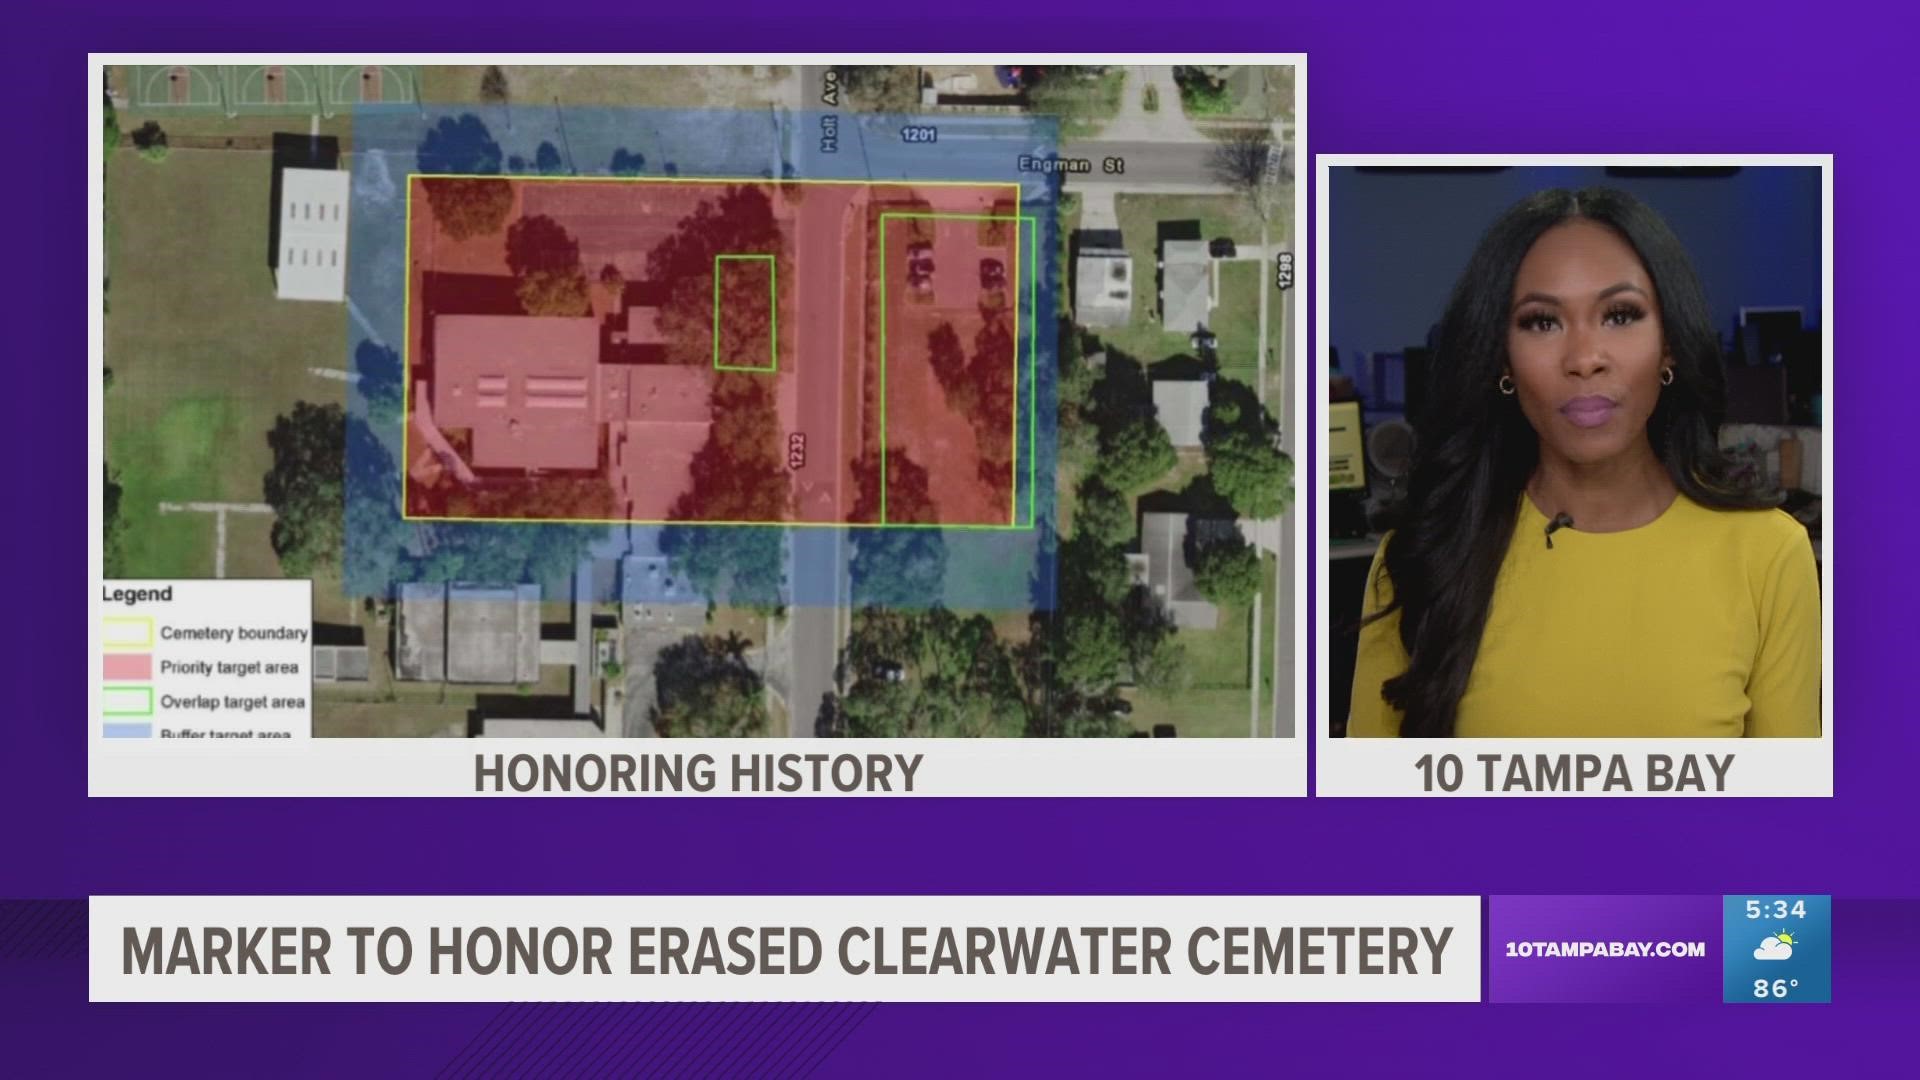 A Clearwater historian said he expects the marker to go up in the next 10 days.